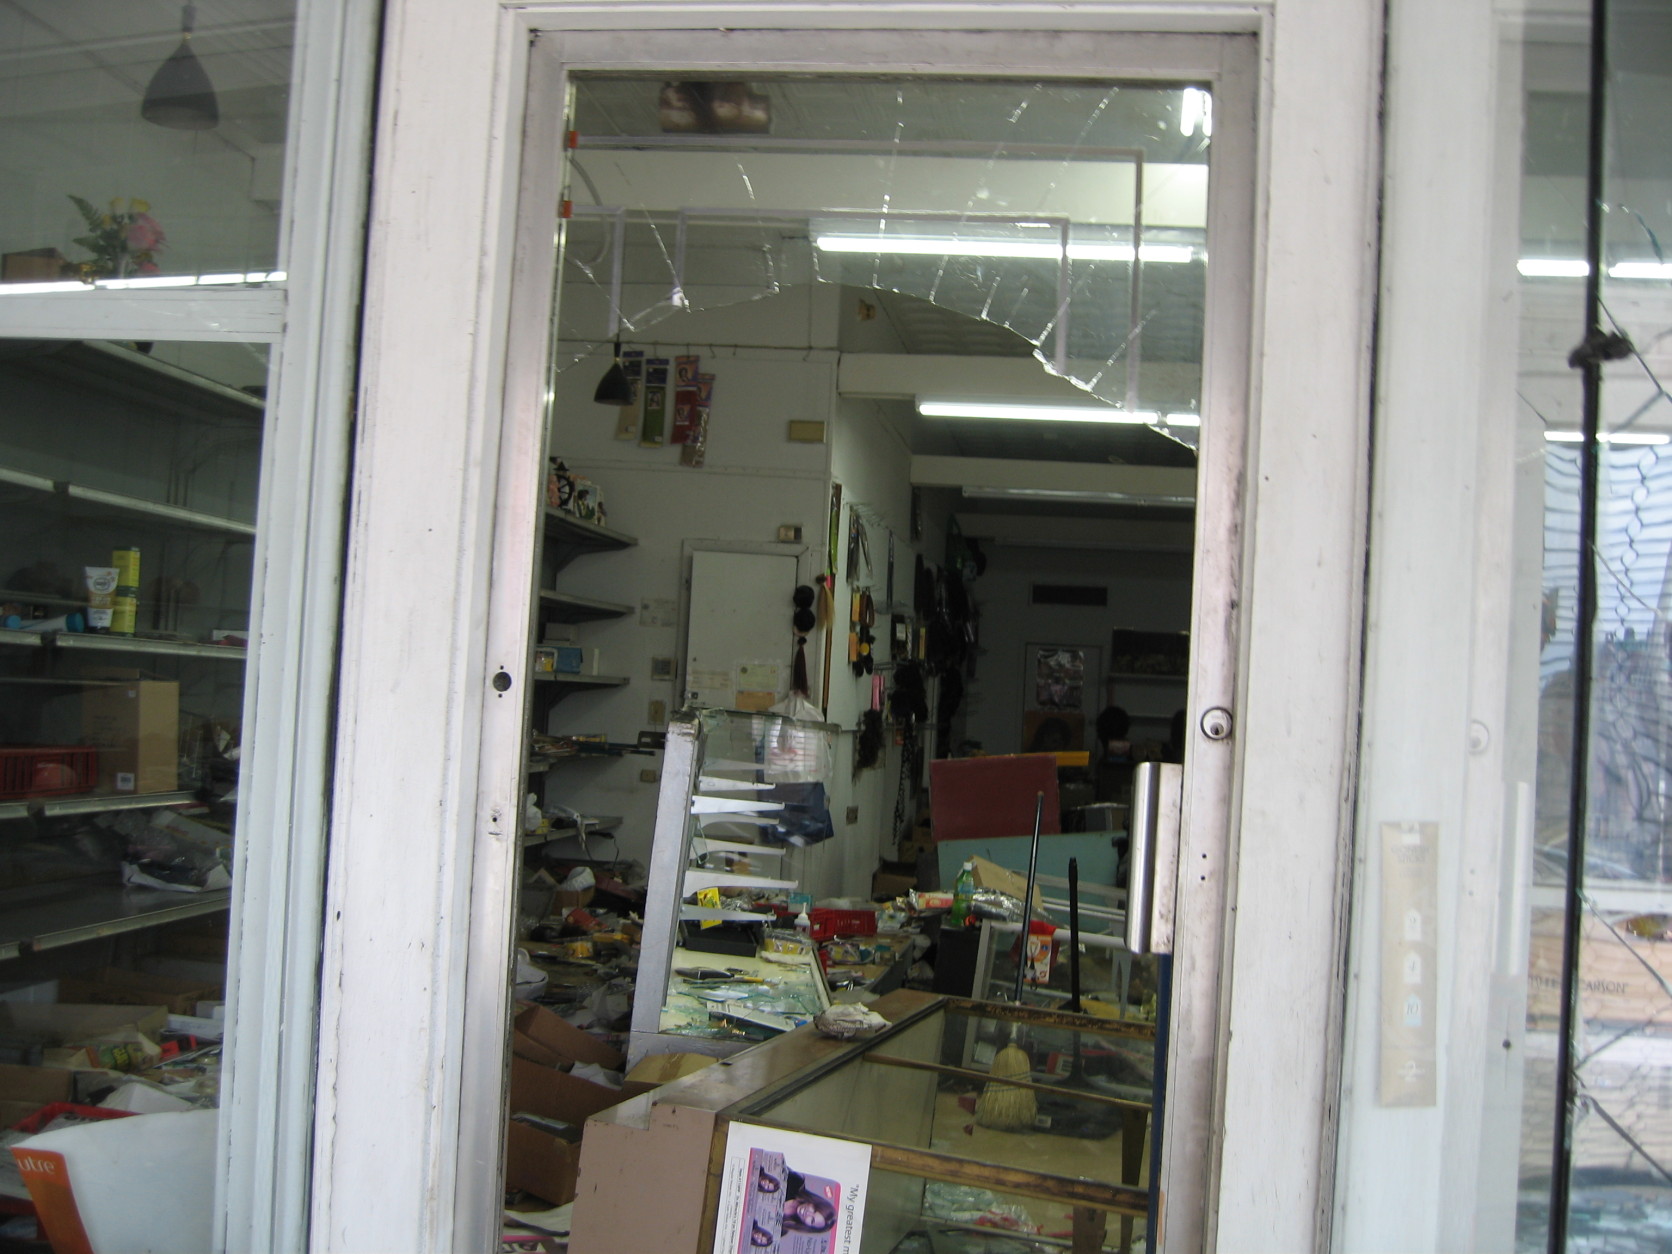 Looters broke the windows to get into J-mart Wigs. (Courtesy Matthew Chung)